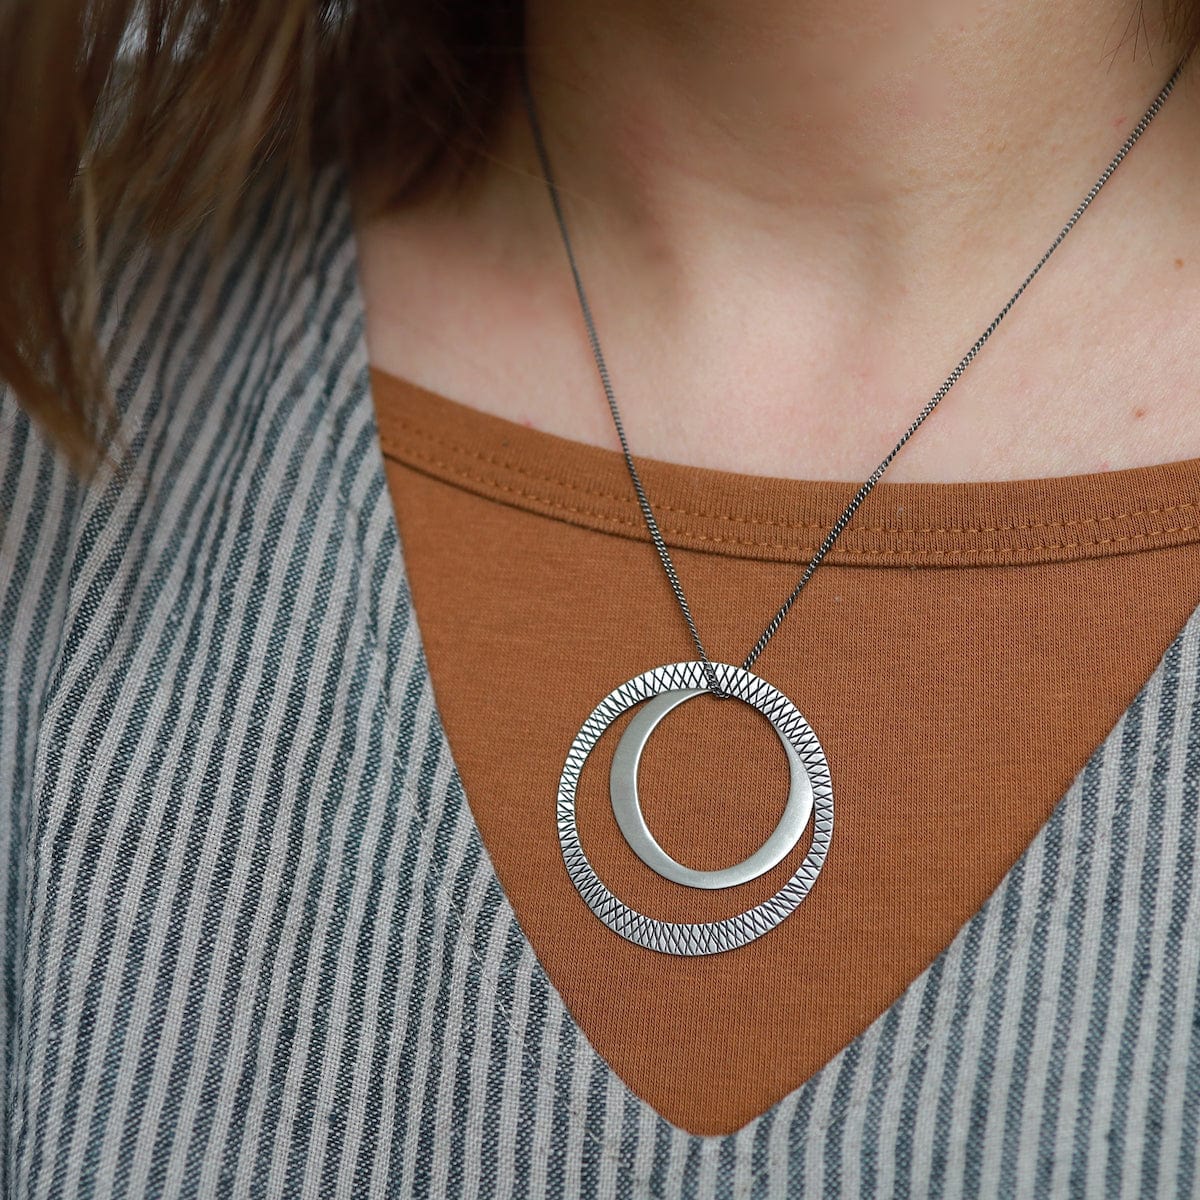 NKL Etched & Plain Silver Circles Necklace